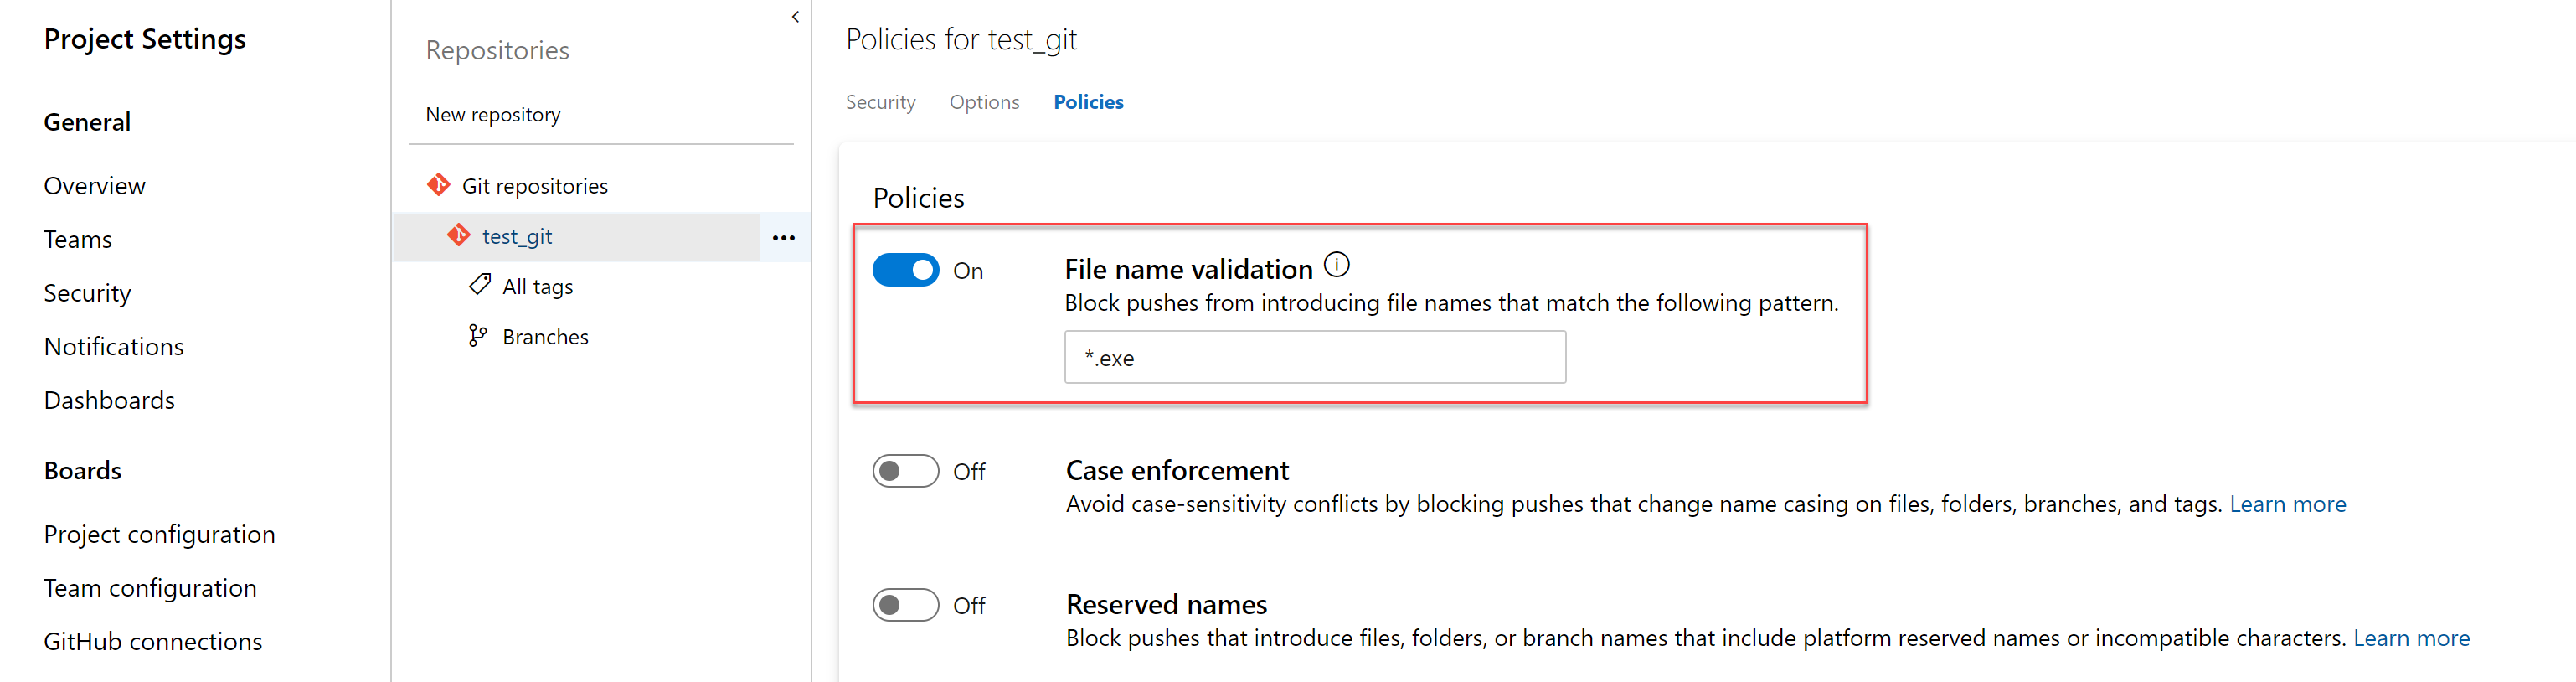 Policy to block files with specified patterns.